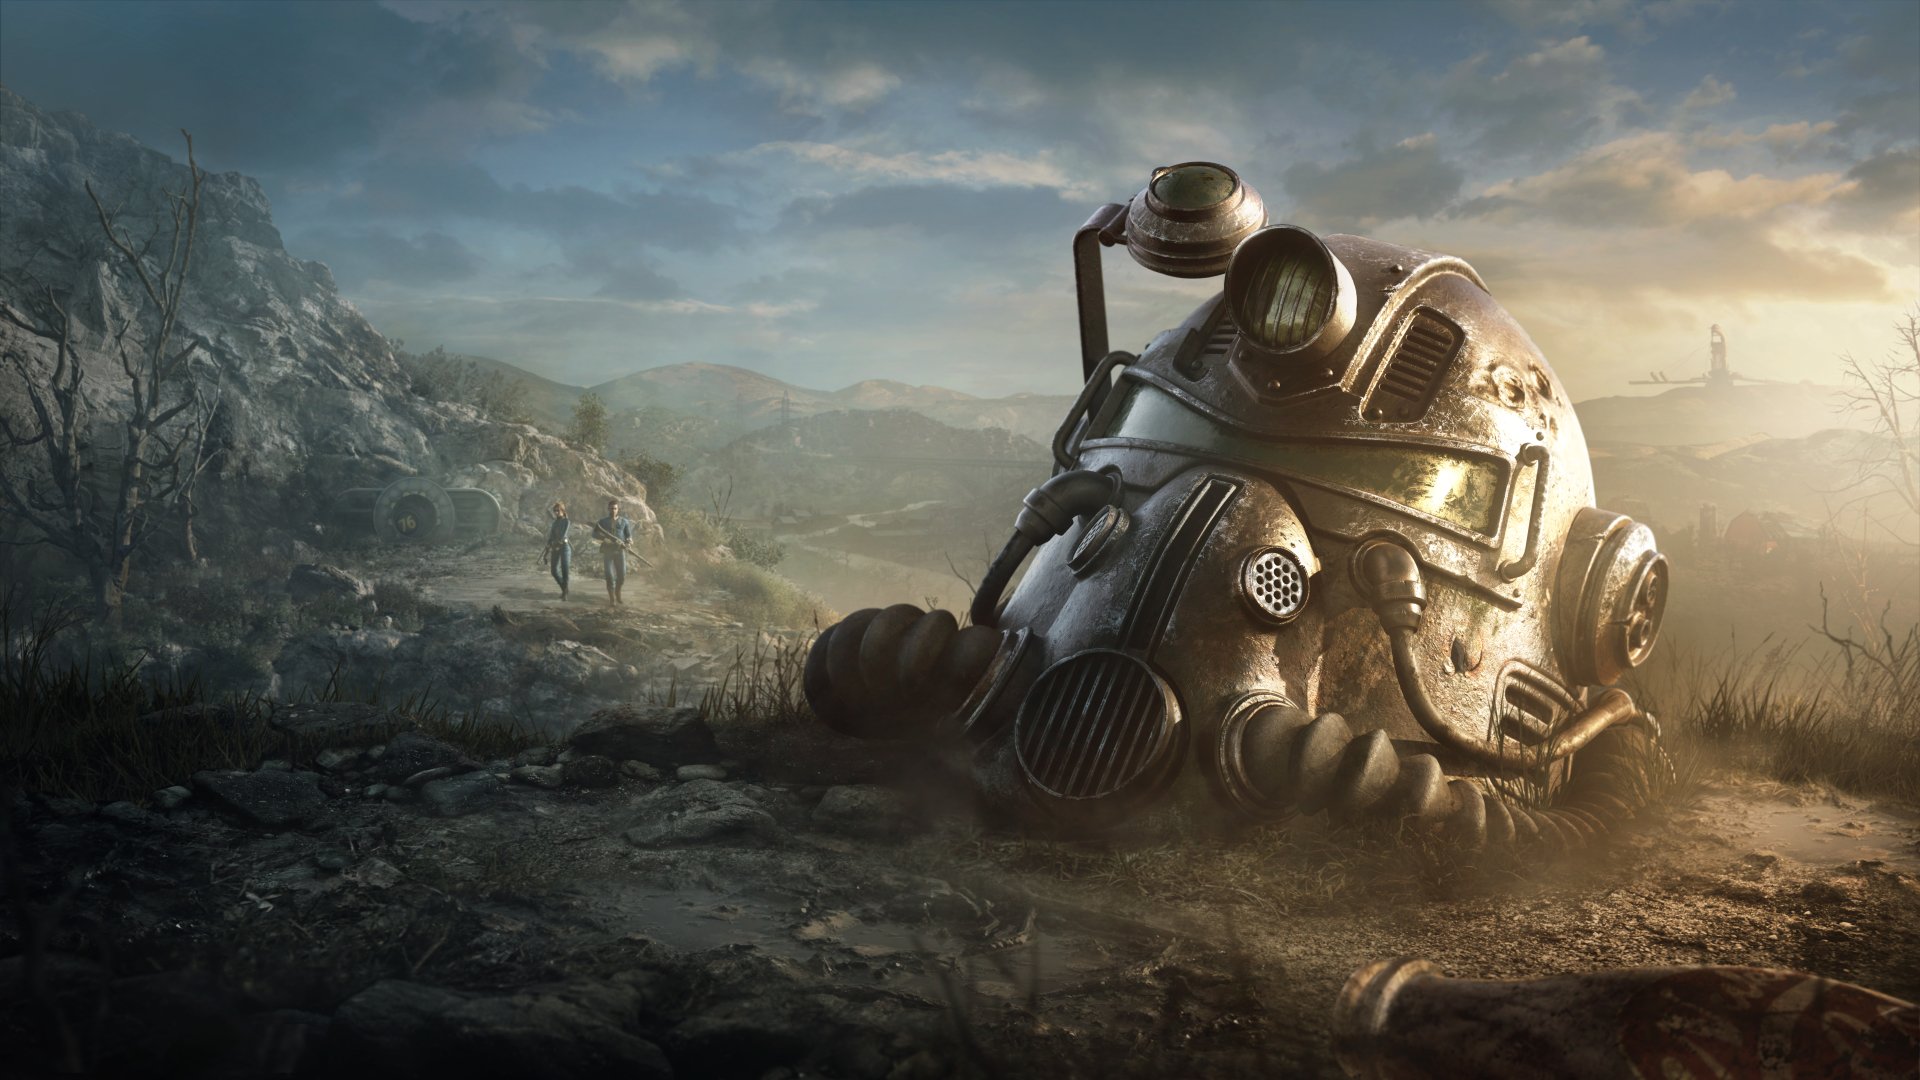 fallout 4 wallpaper 1920x1080,games,adventure game,cg artwork,strategy video game,photography